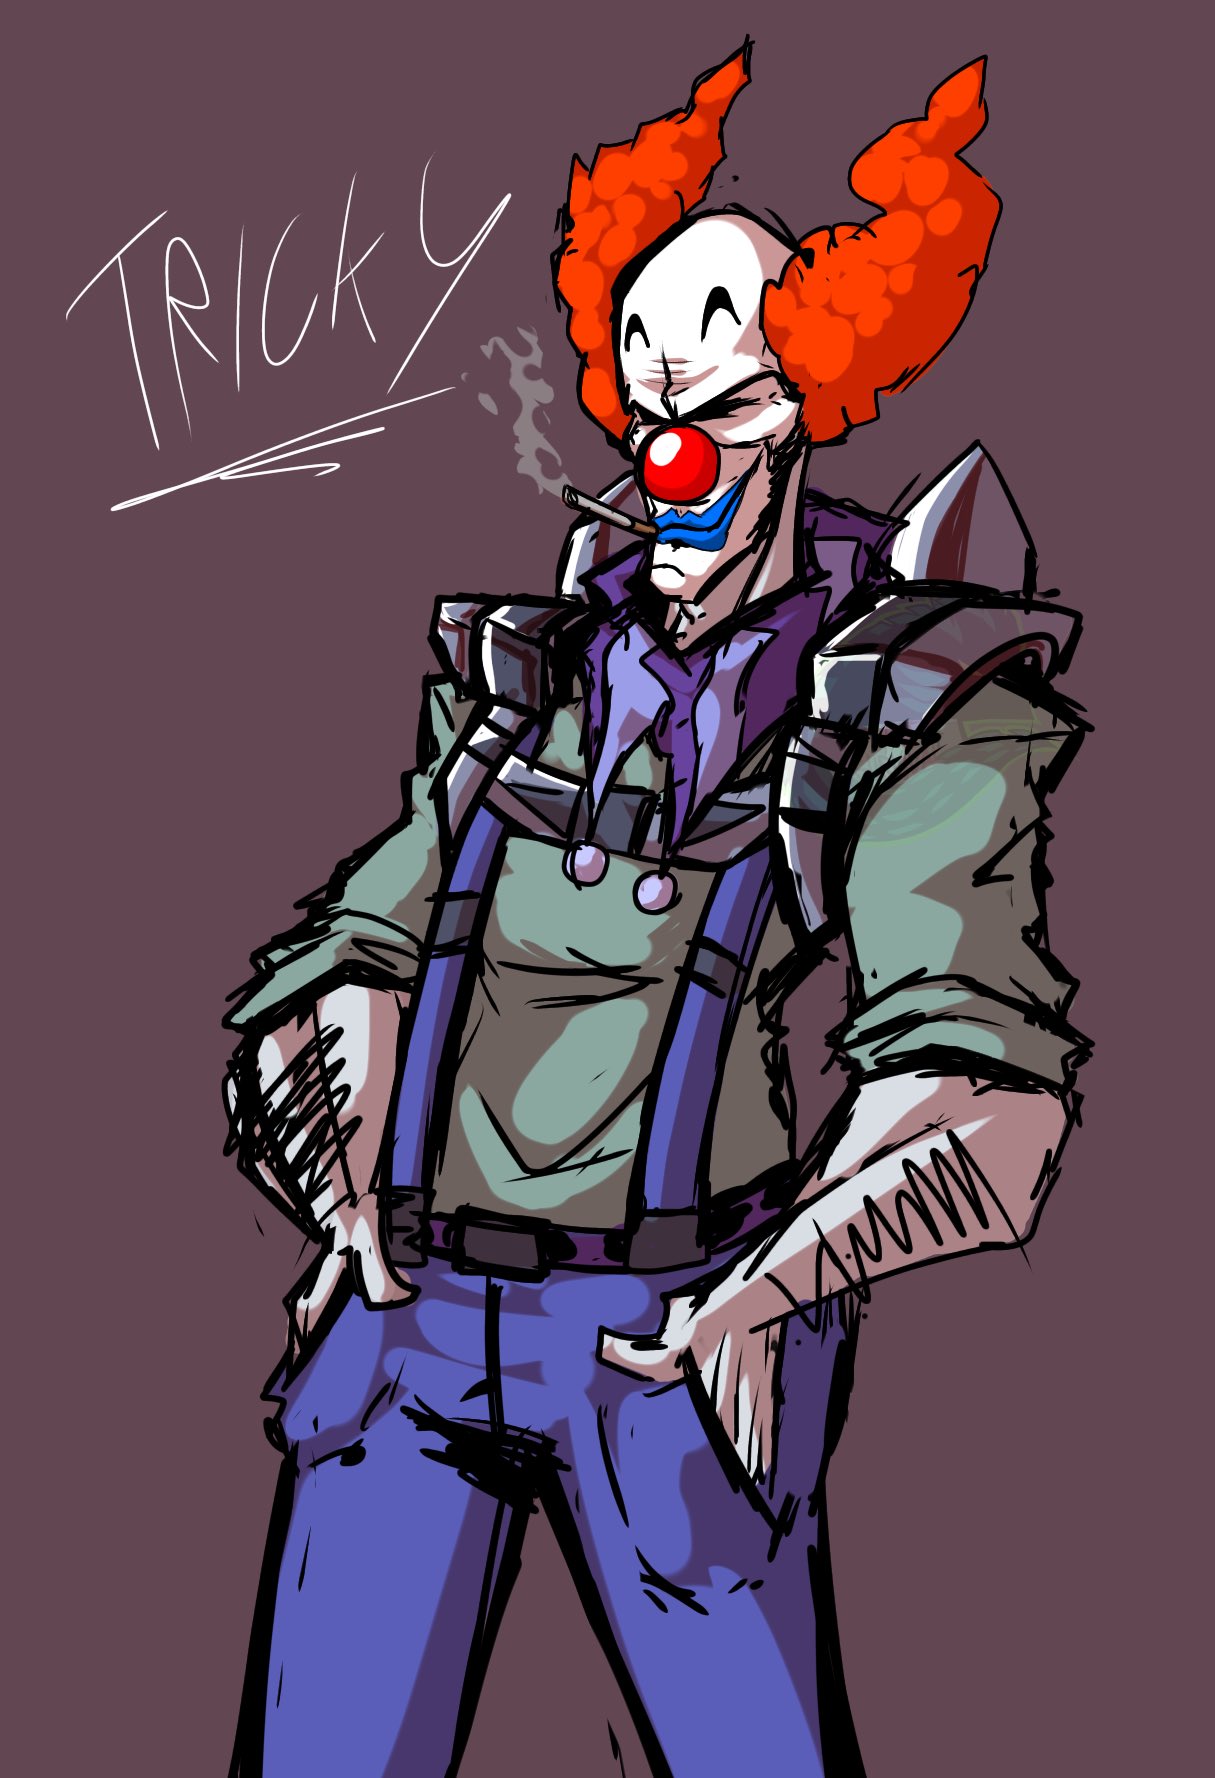 Tricky the Clown from Madness Combat Costume